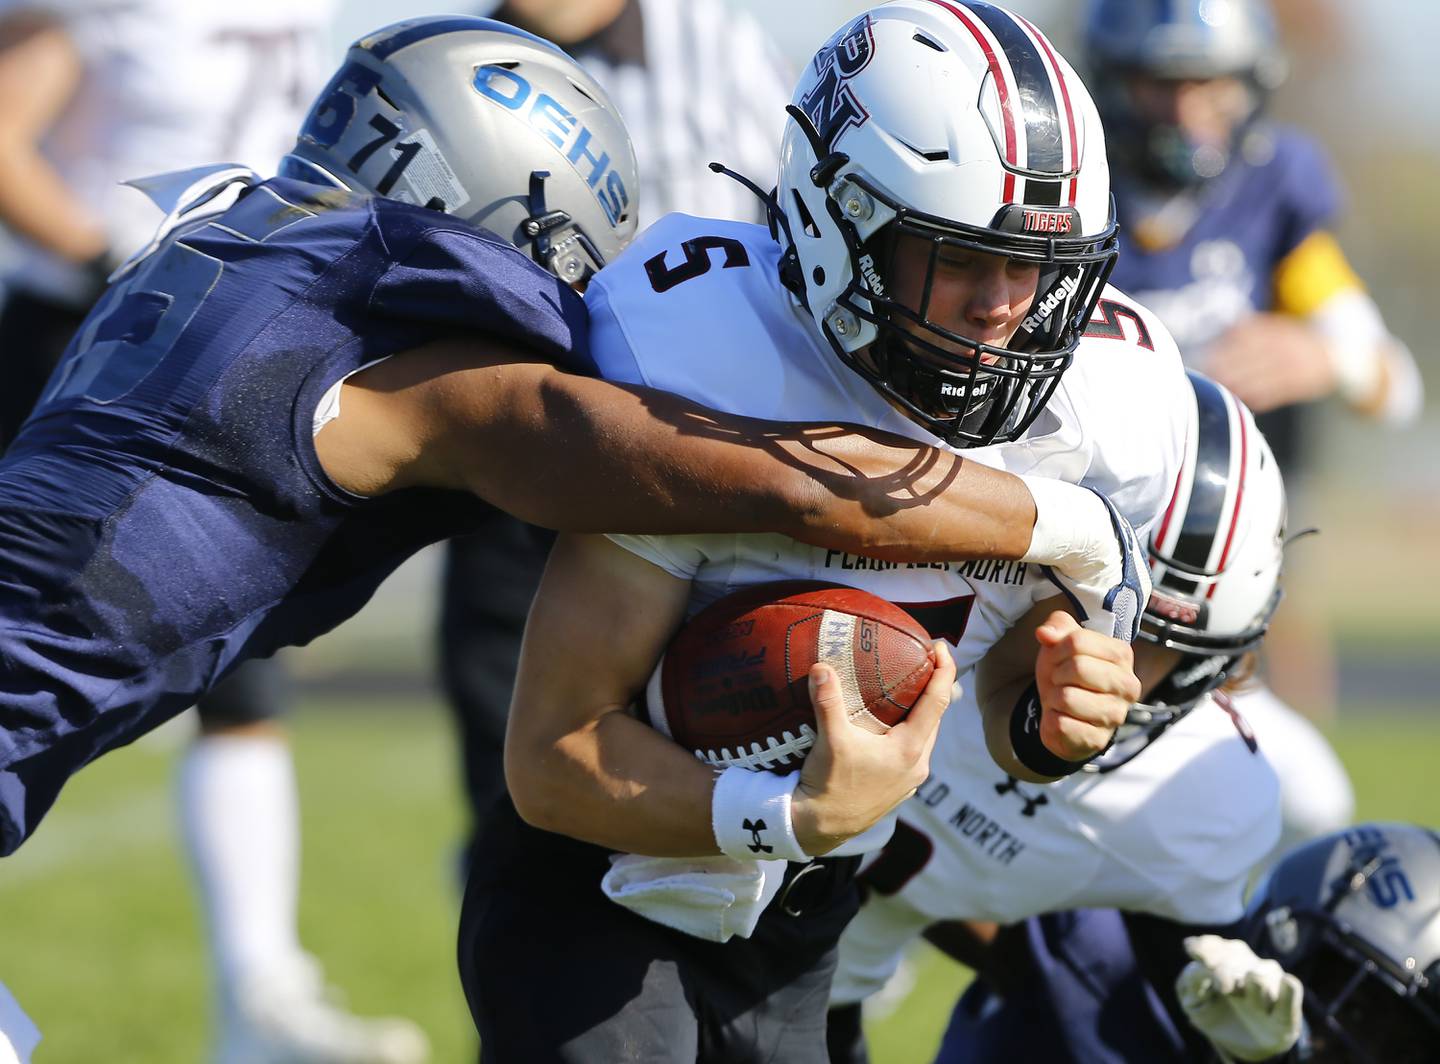 Plainfield North's Harrison Klein carries the ball during the varsity football game between Plainfield North and Oswego East on Saturday, October 23, 2021 at Oswego East high school in Oswego, IL.